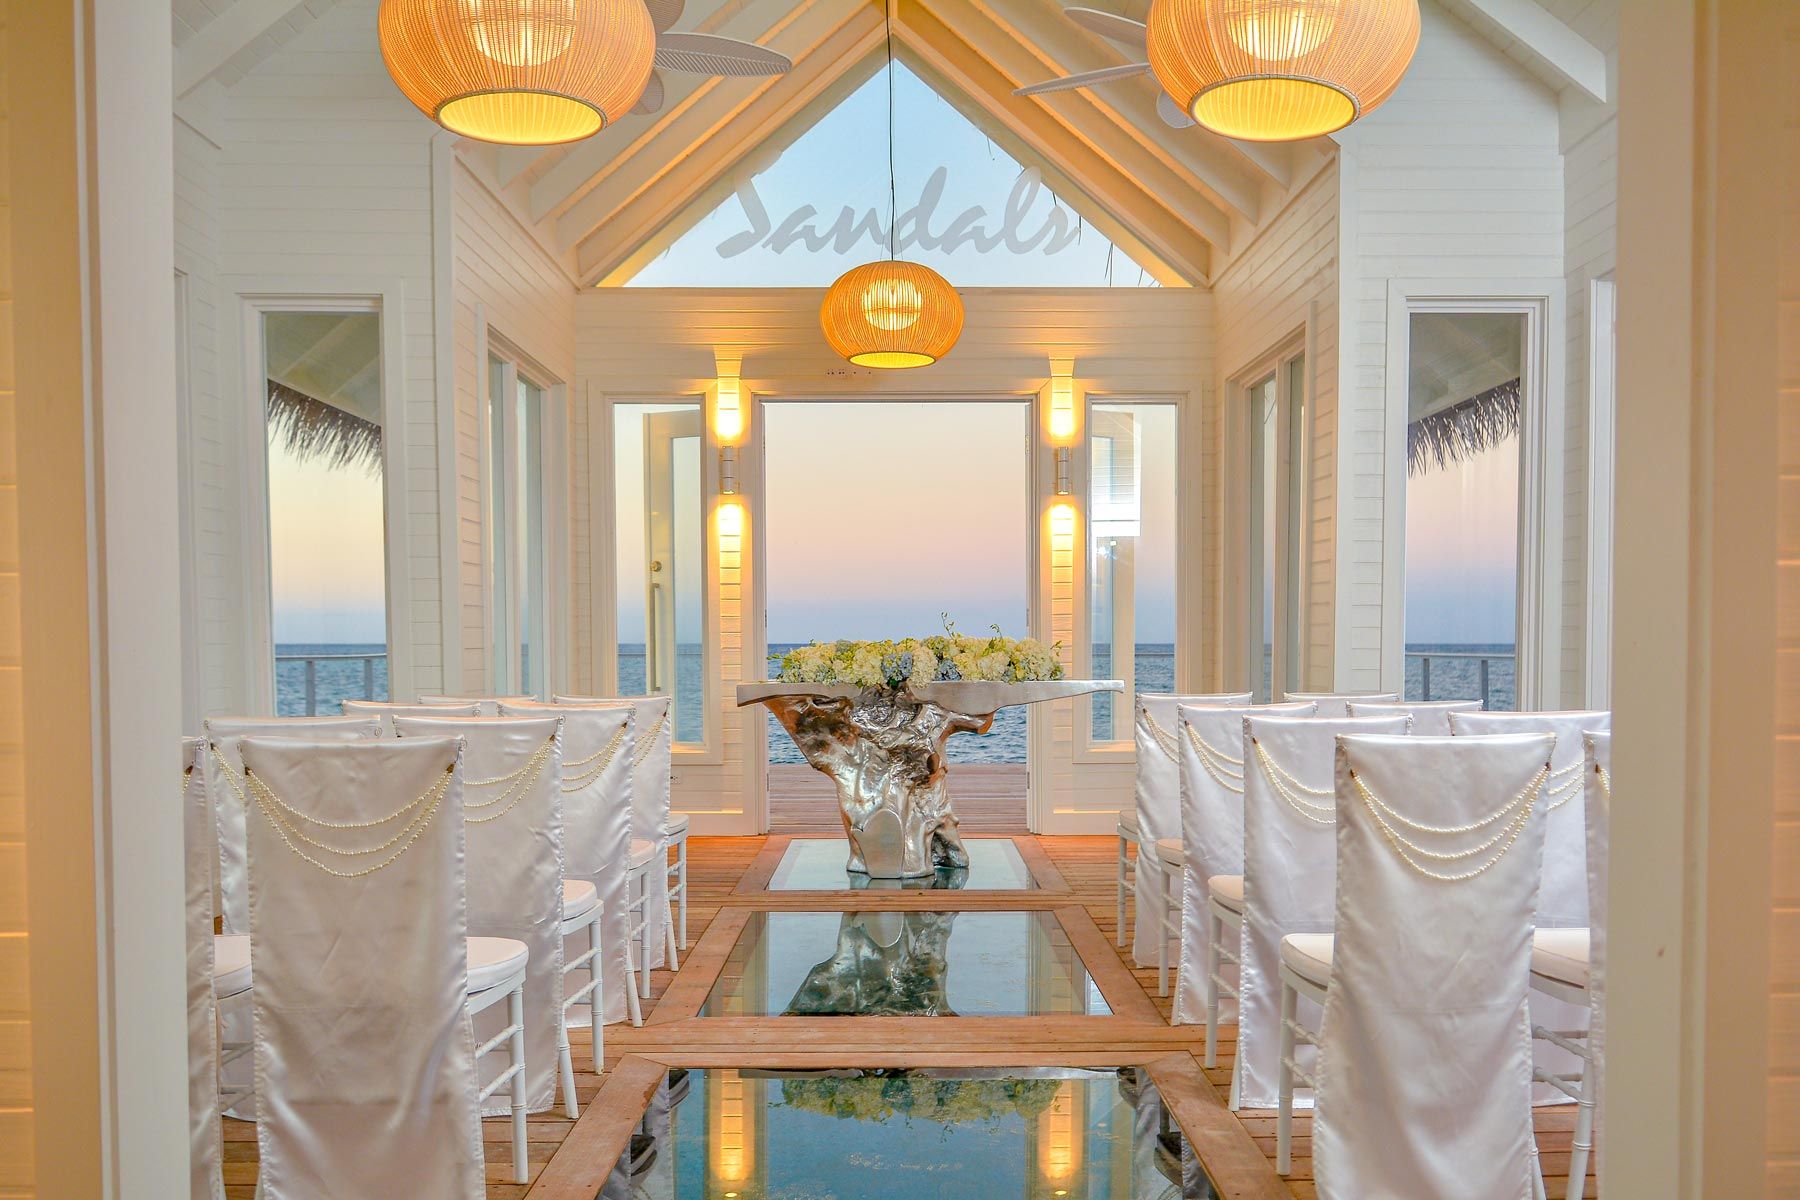 Sandals Montego Bay SMB Over The Water Chapel Interior